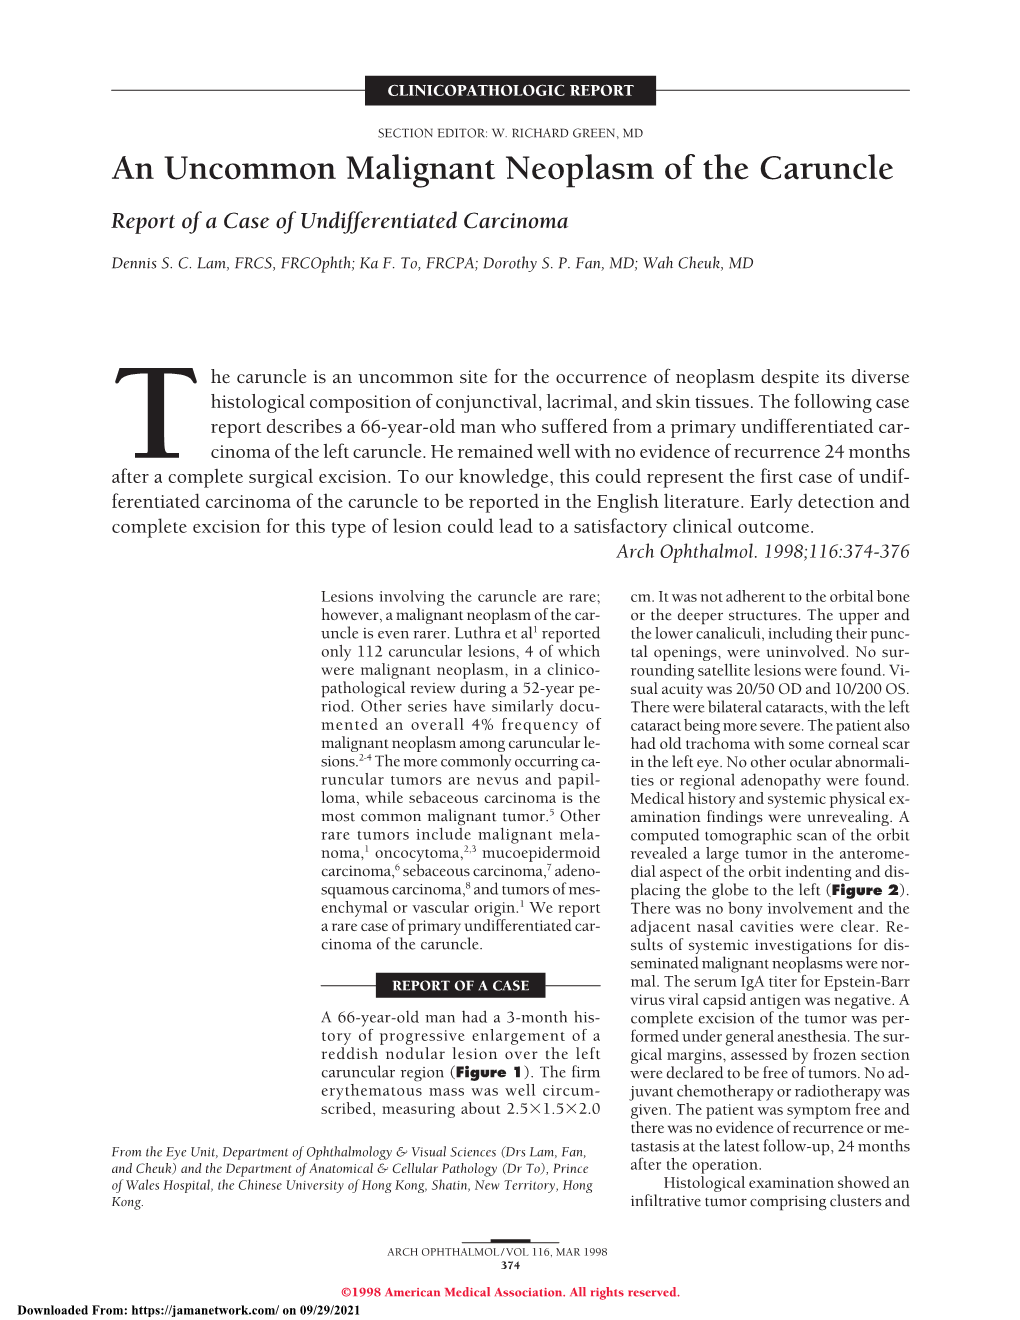 An Uncommon Malignant Neoplasm of the Caruncle Report of a Case of Undifferentiated Carcinoma